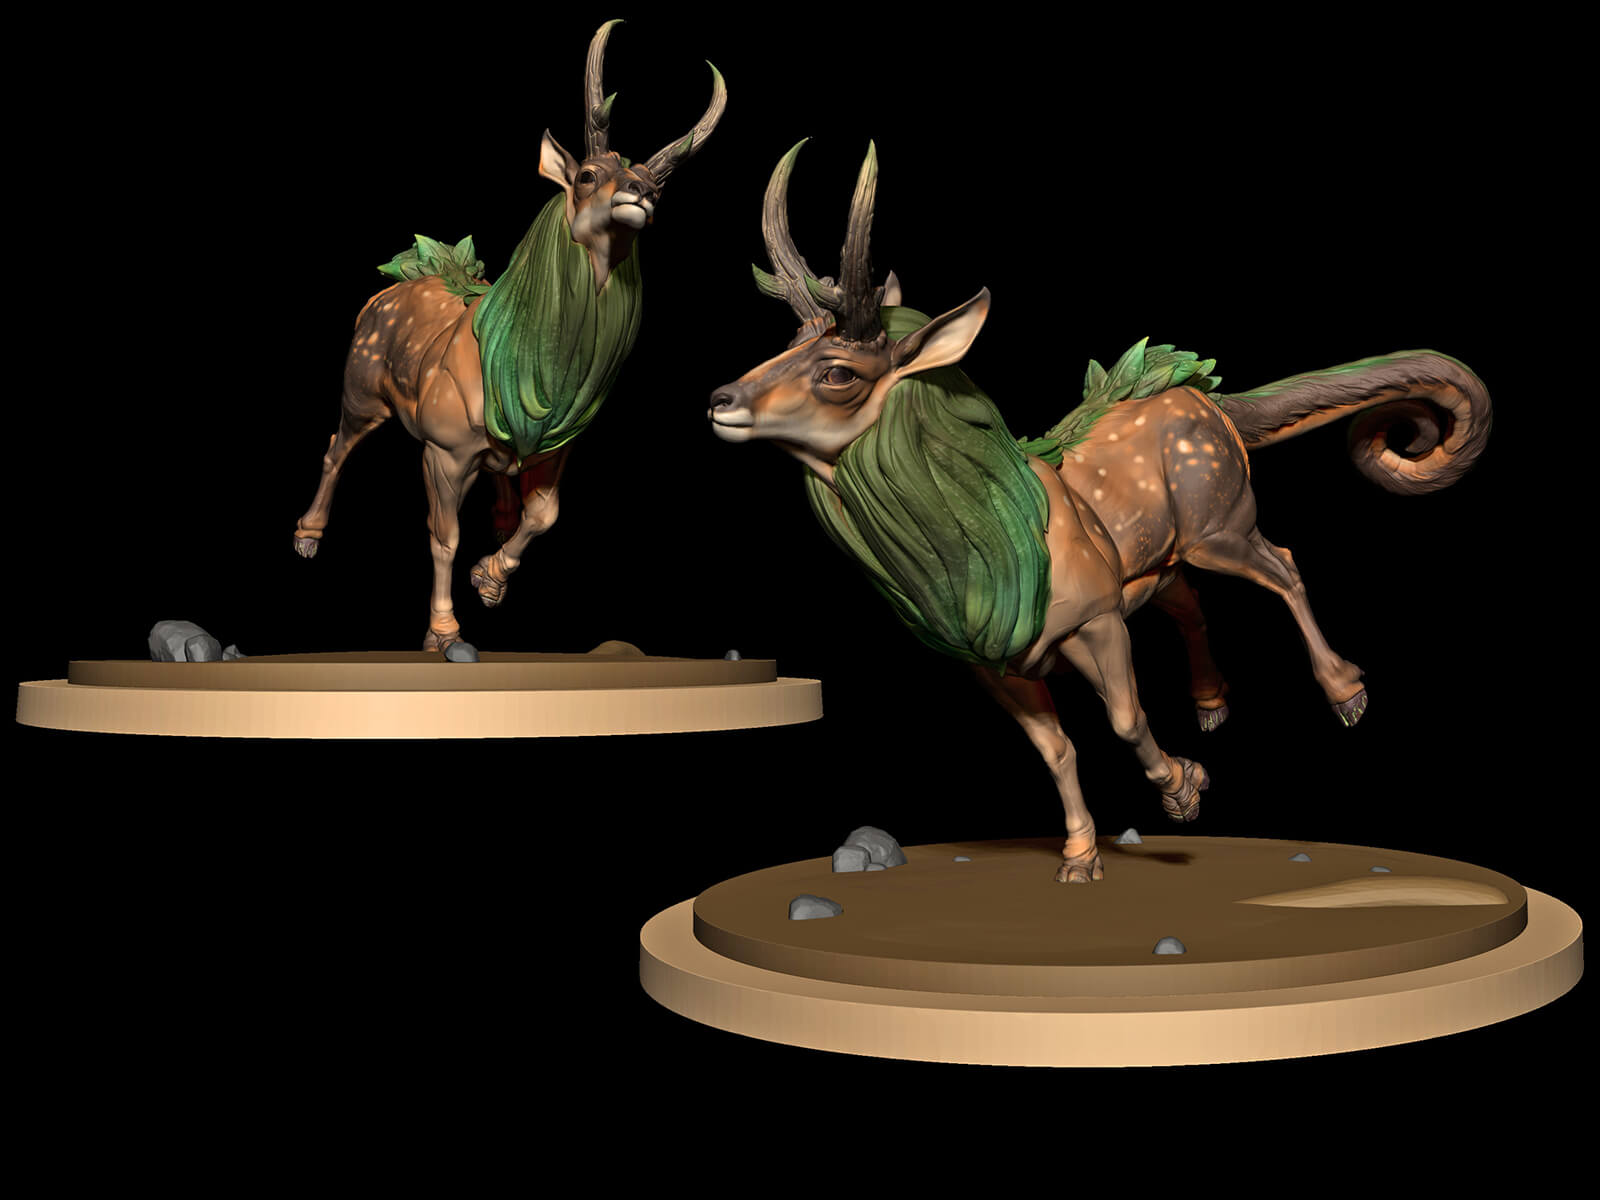 computer-generated 3D models of a deer-like creature with a green mane and long, thick tail in mid-run